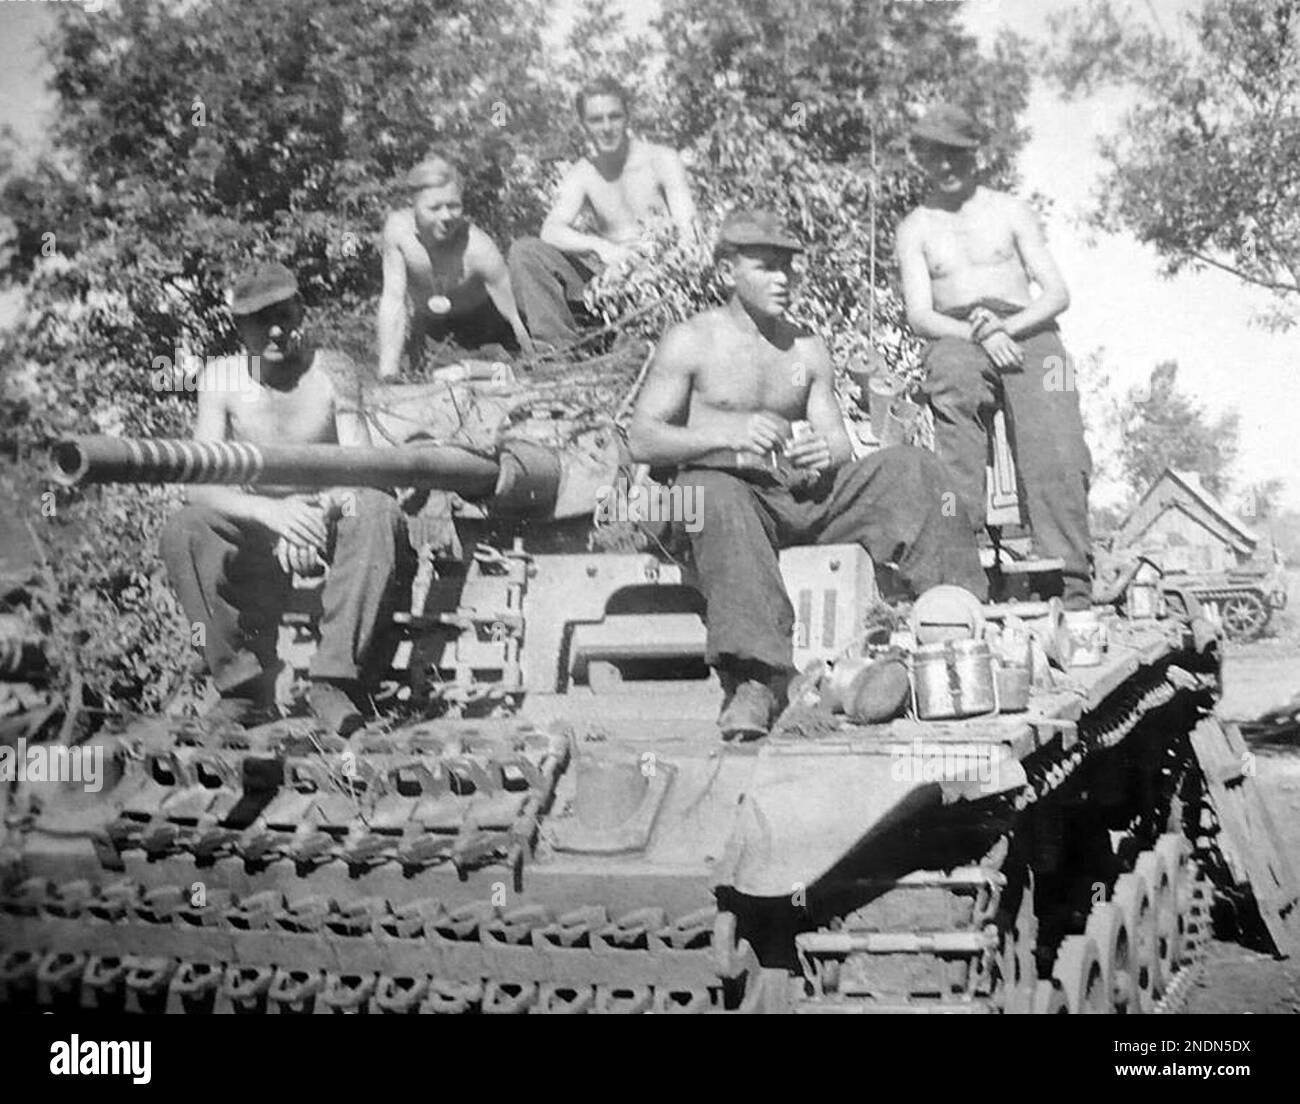 Soldiers of the 3rd SS Panzer division "Totenkopf" on board their Panzer III tank at Kursk, Russia in 1943. Stock Photo